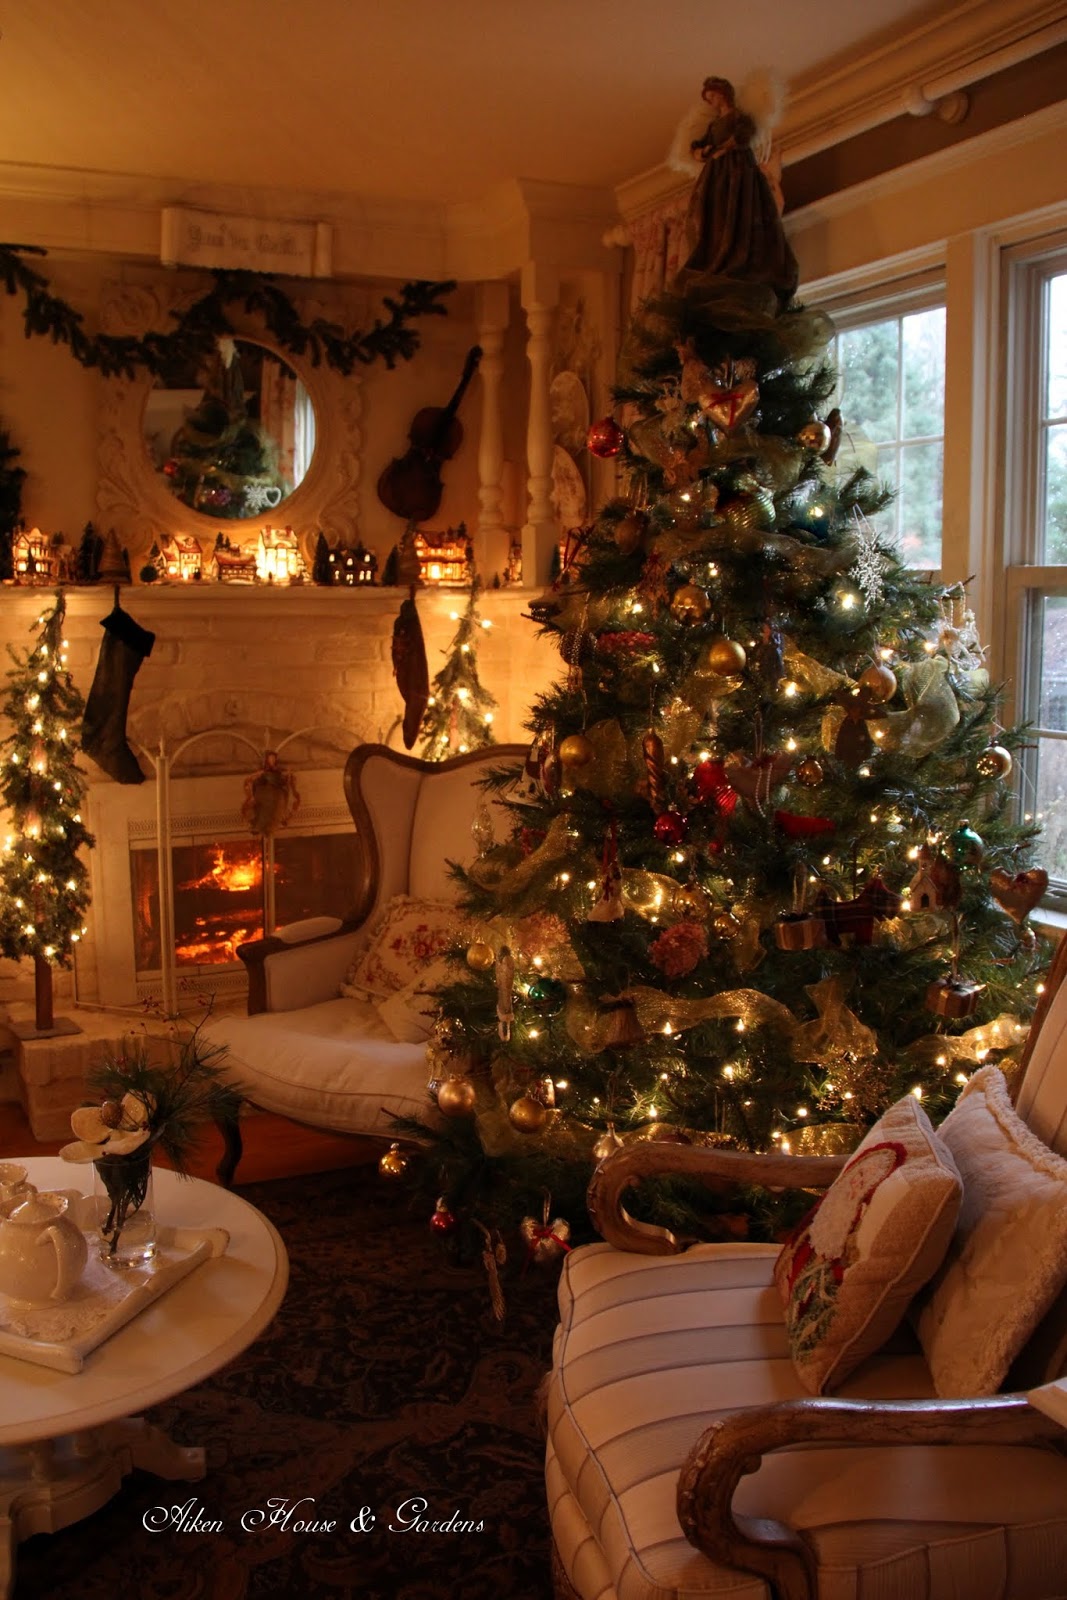 Aiken House & Gardens: Christmas Touches in our Library